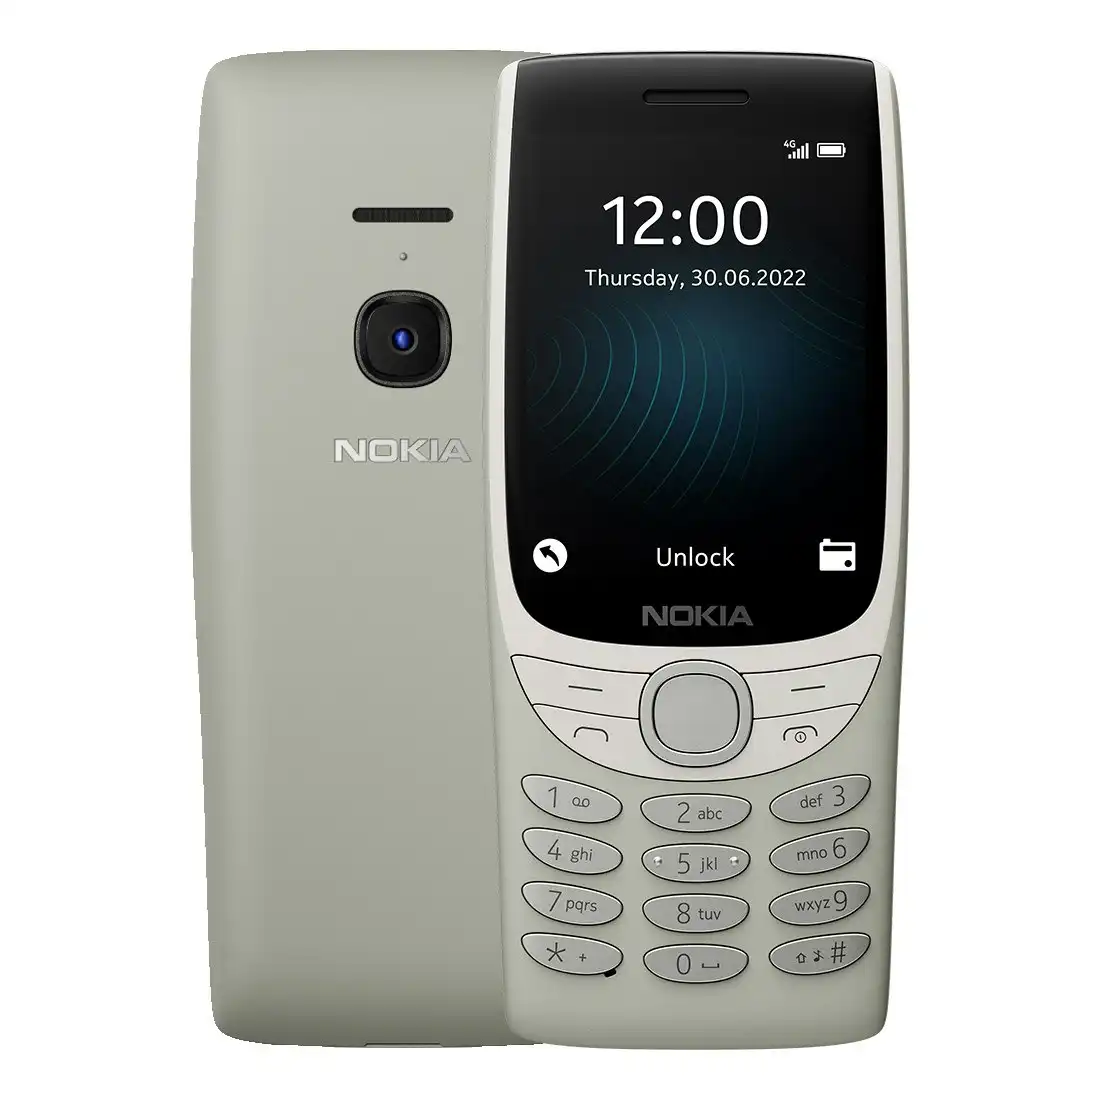 Nokia 8210 4G (Dual Sim, 2.8 inches, 128MB/48MB) Feature phone - Anzo Sand